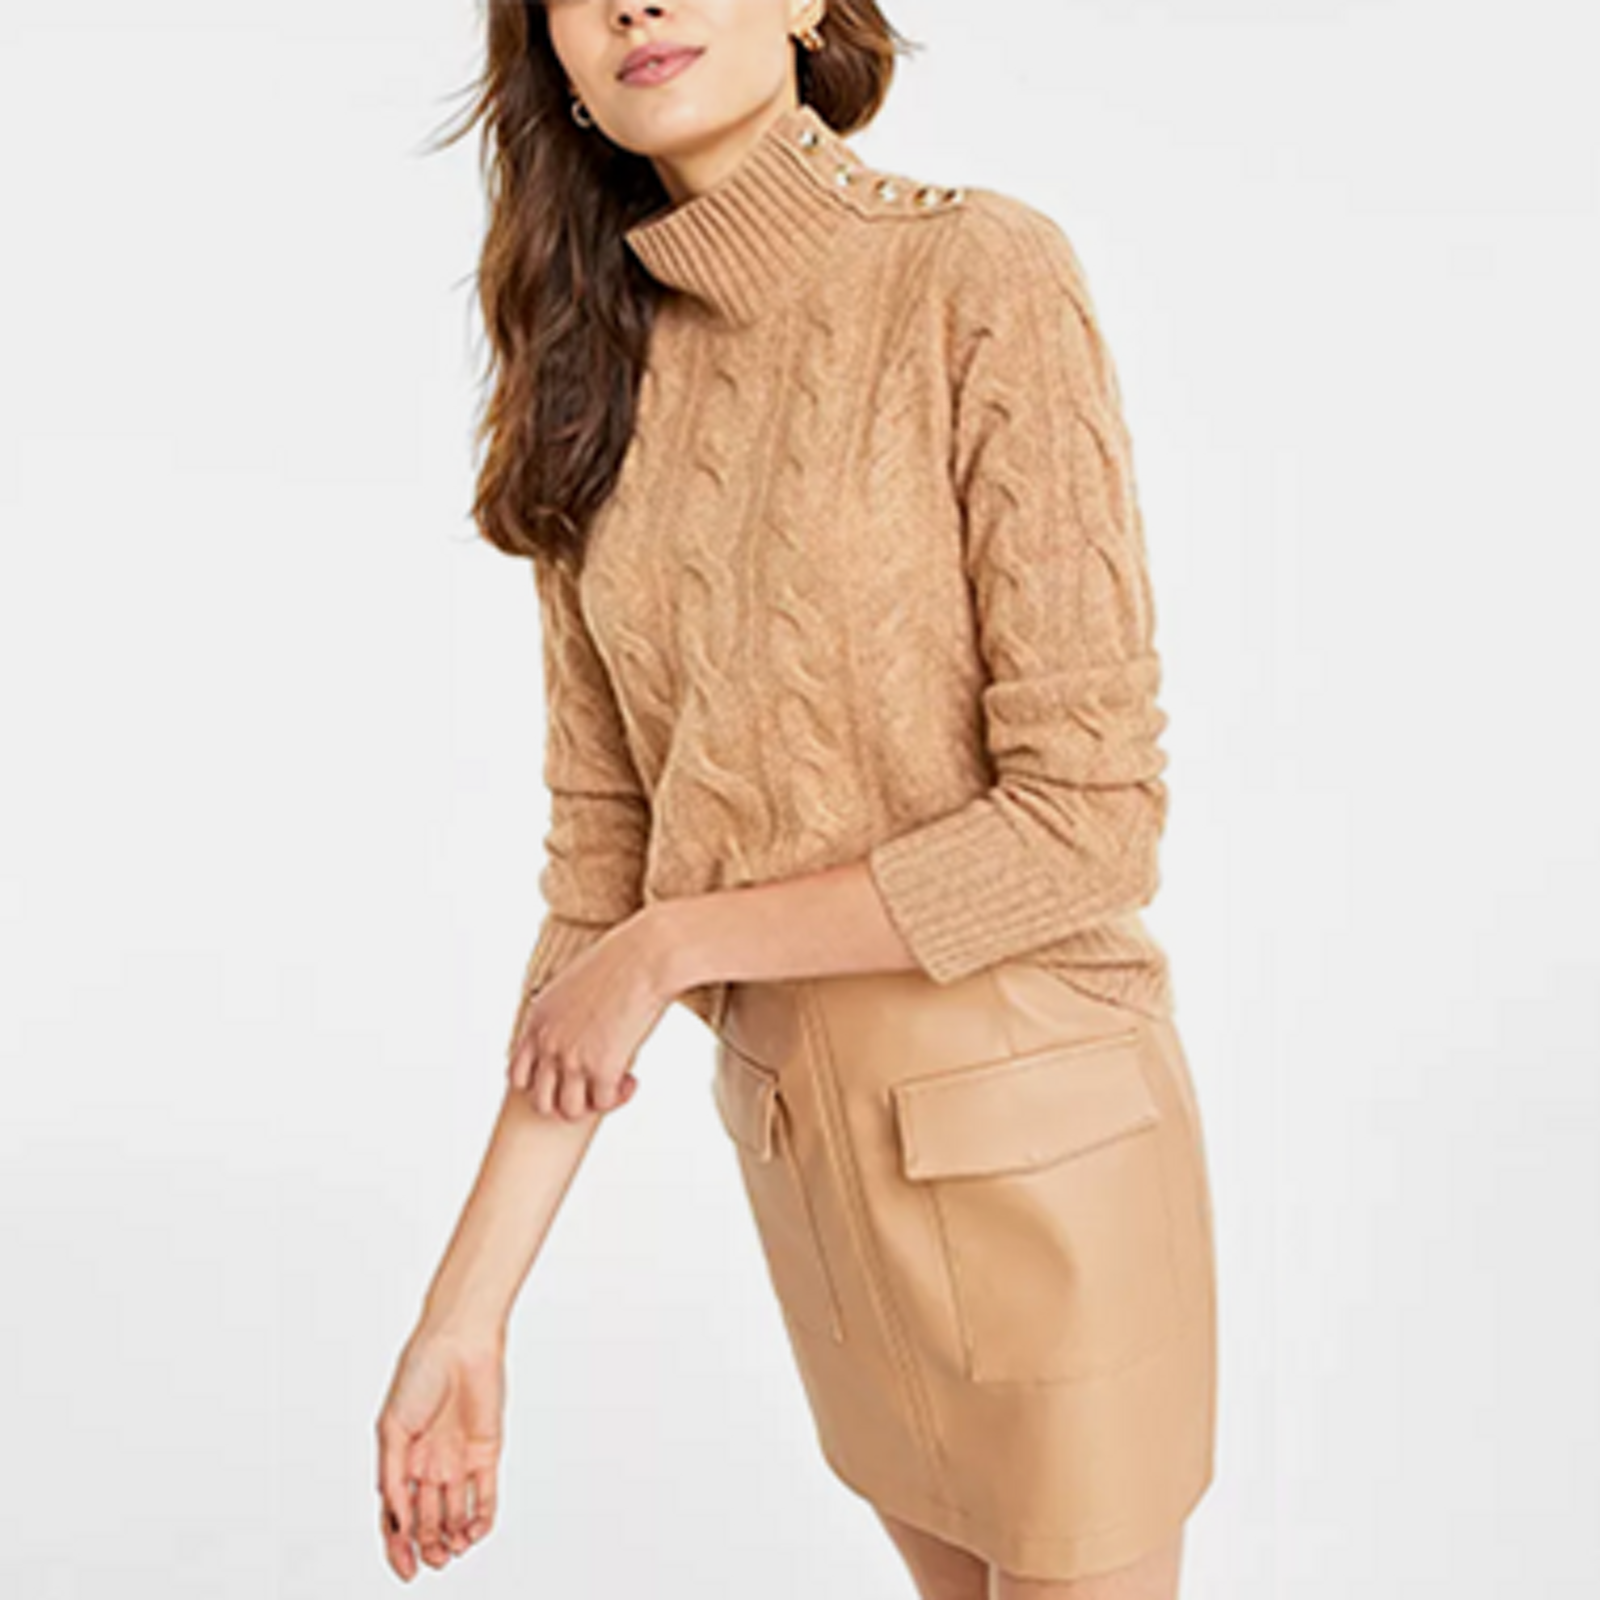 32 Degrees Active Women's Clothing Sale & Clearance - Macy's